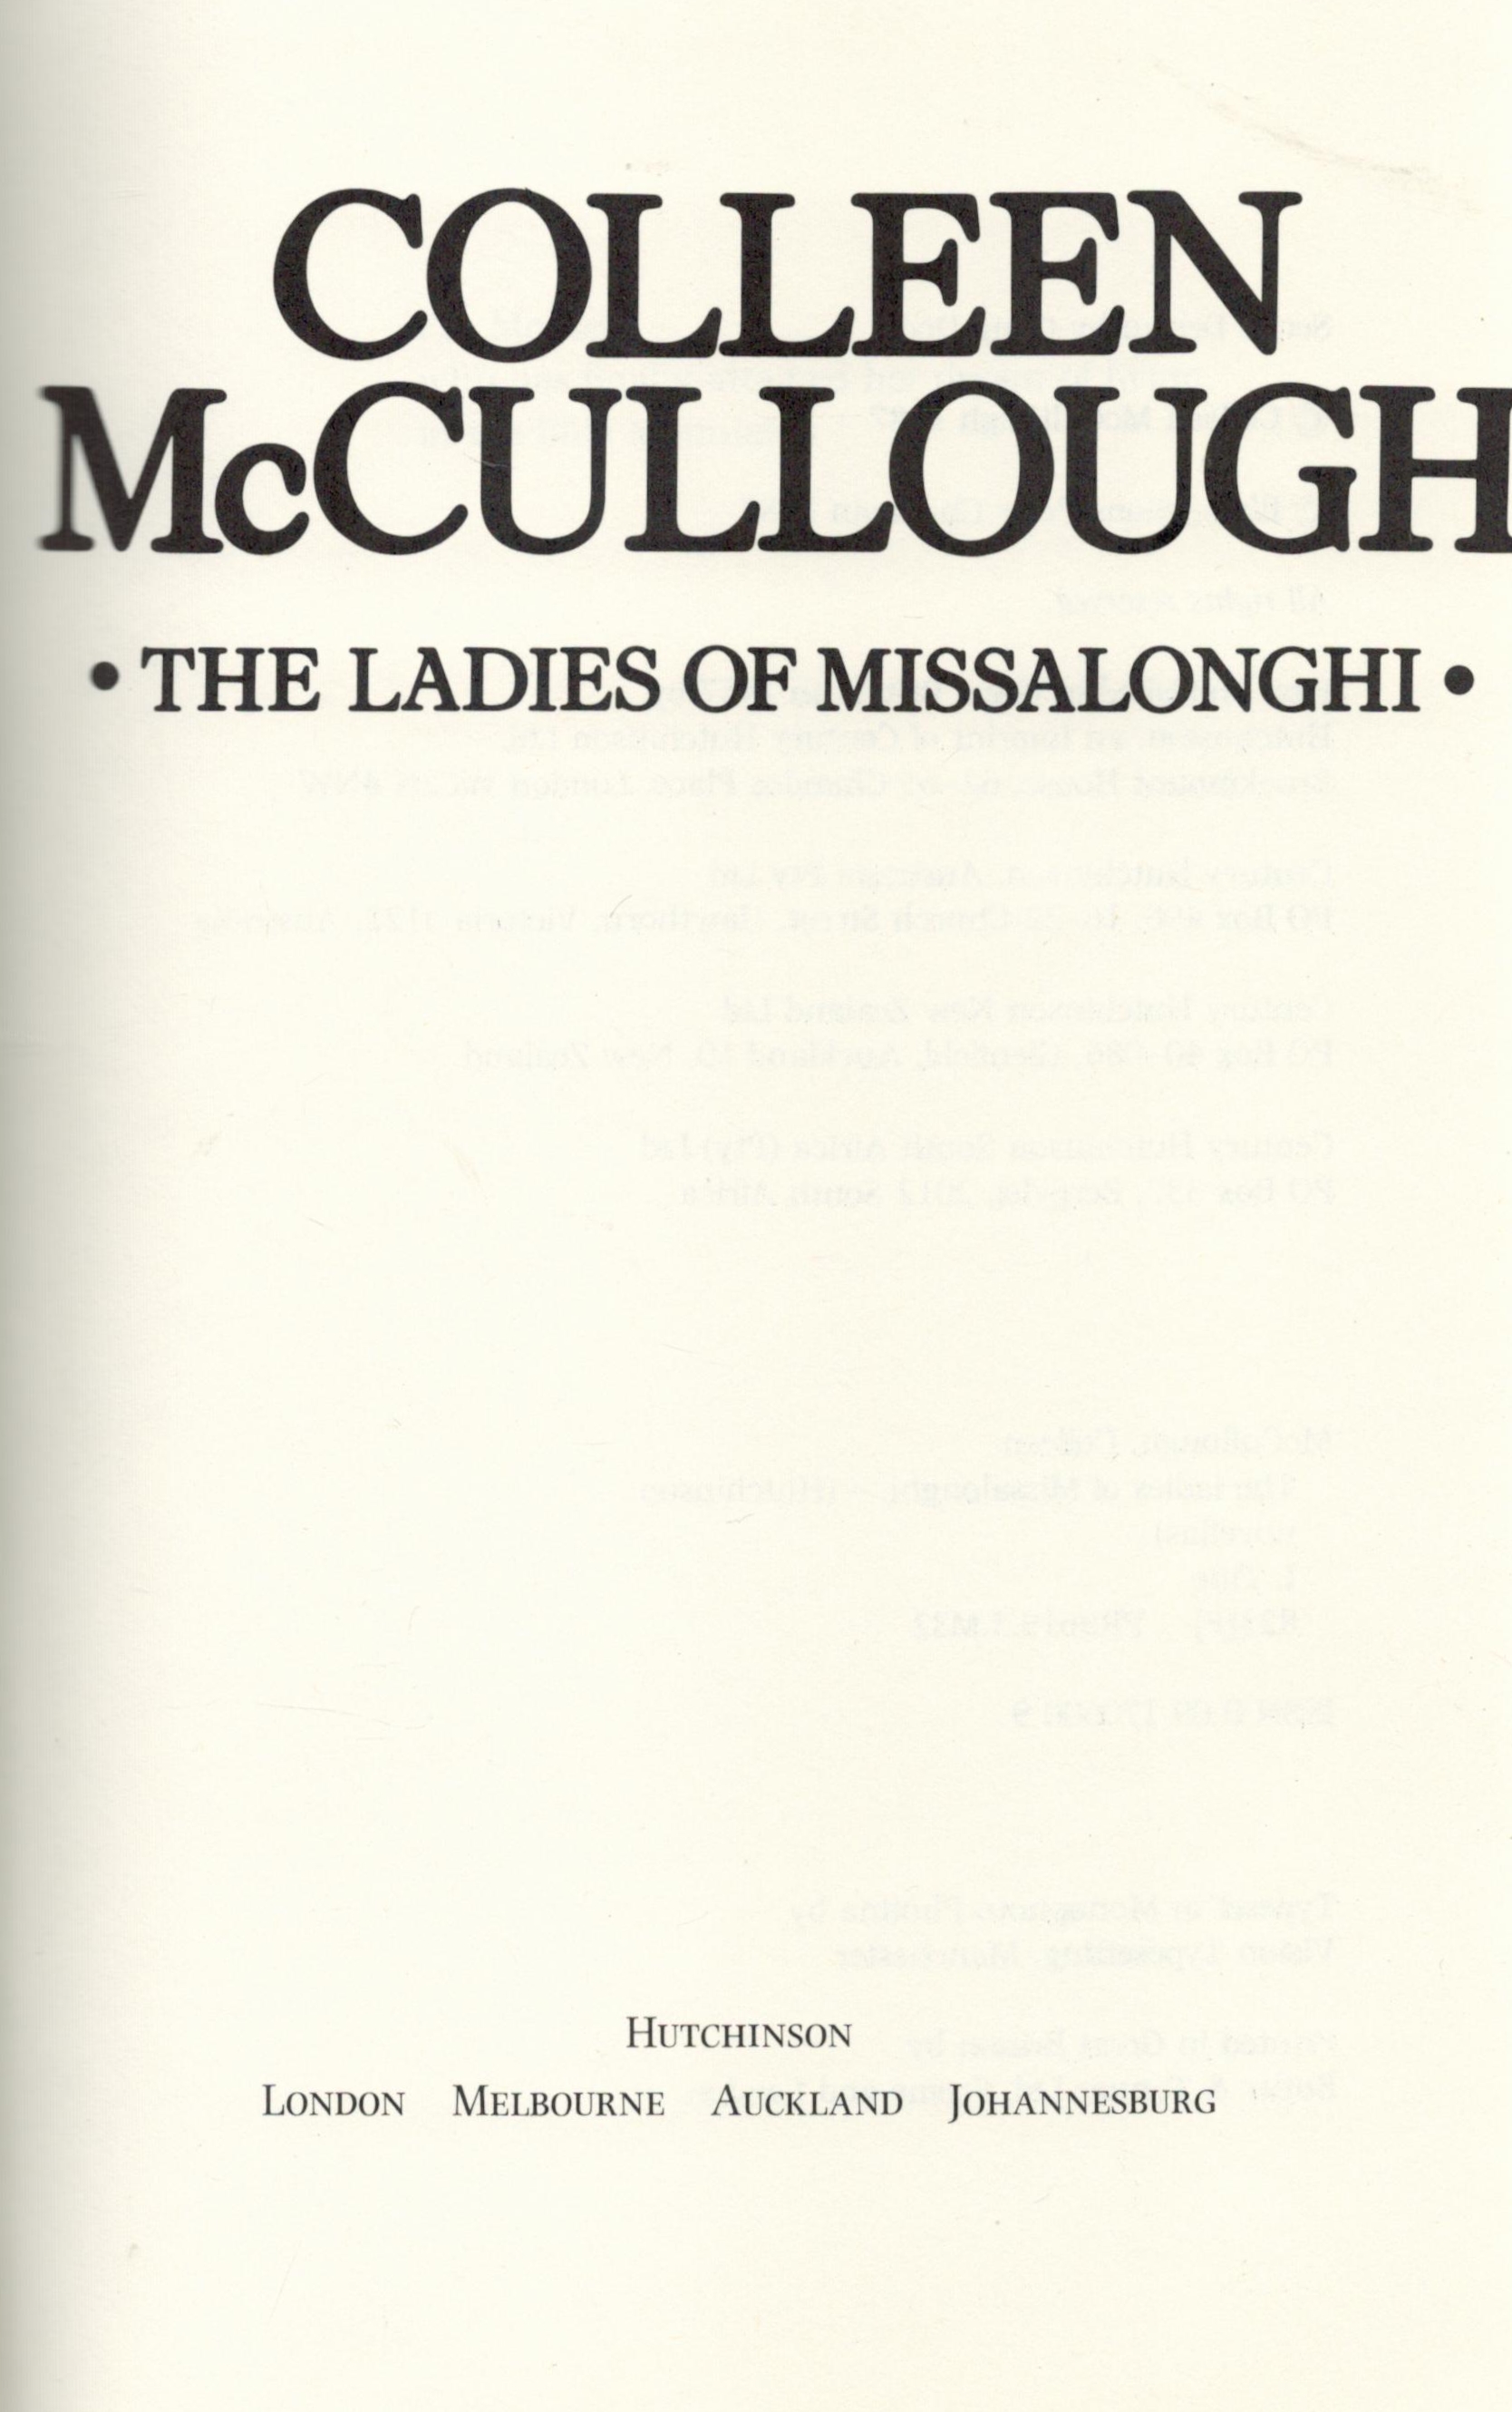 The Ladies of Missalonghi by Colleen McCullough Hardback Book 1987 First Edition published by - Image 2 of 3